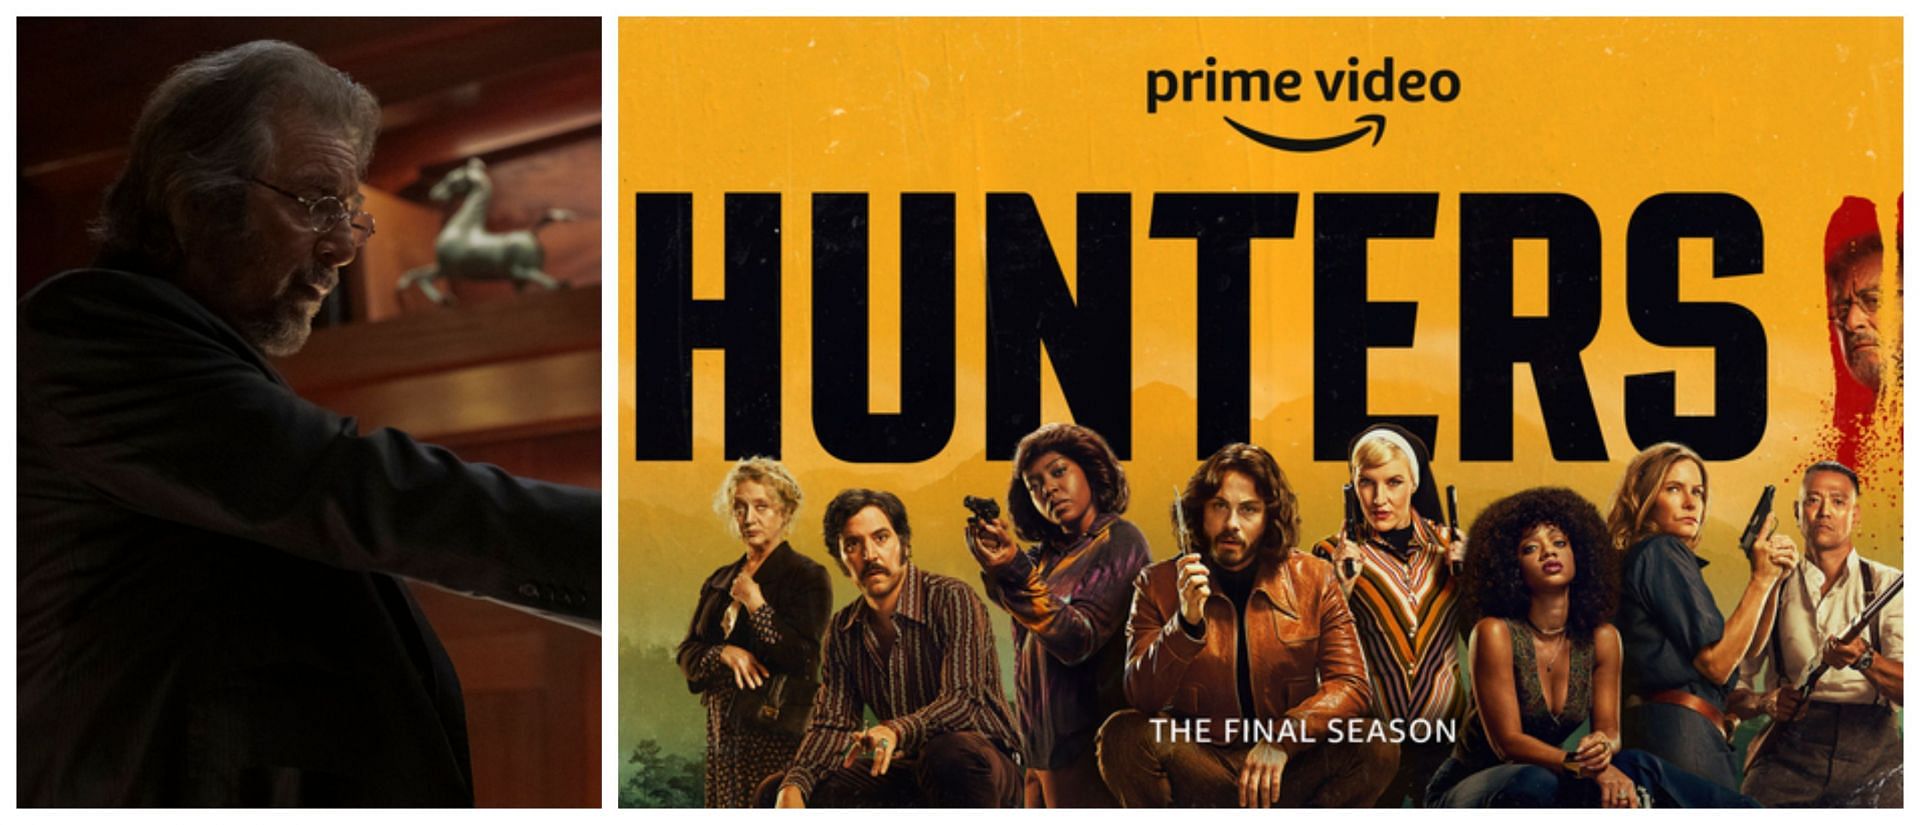 Hunters Season 2 collage (Picture sourced from Amazon Prime Video)